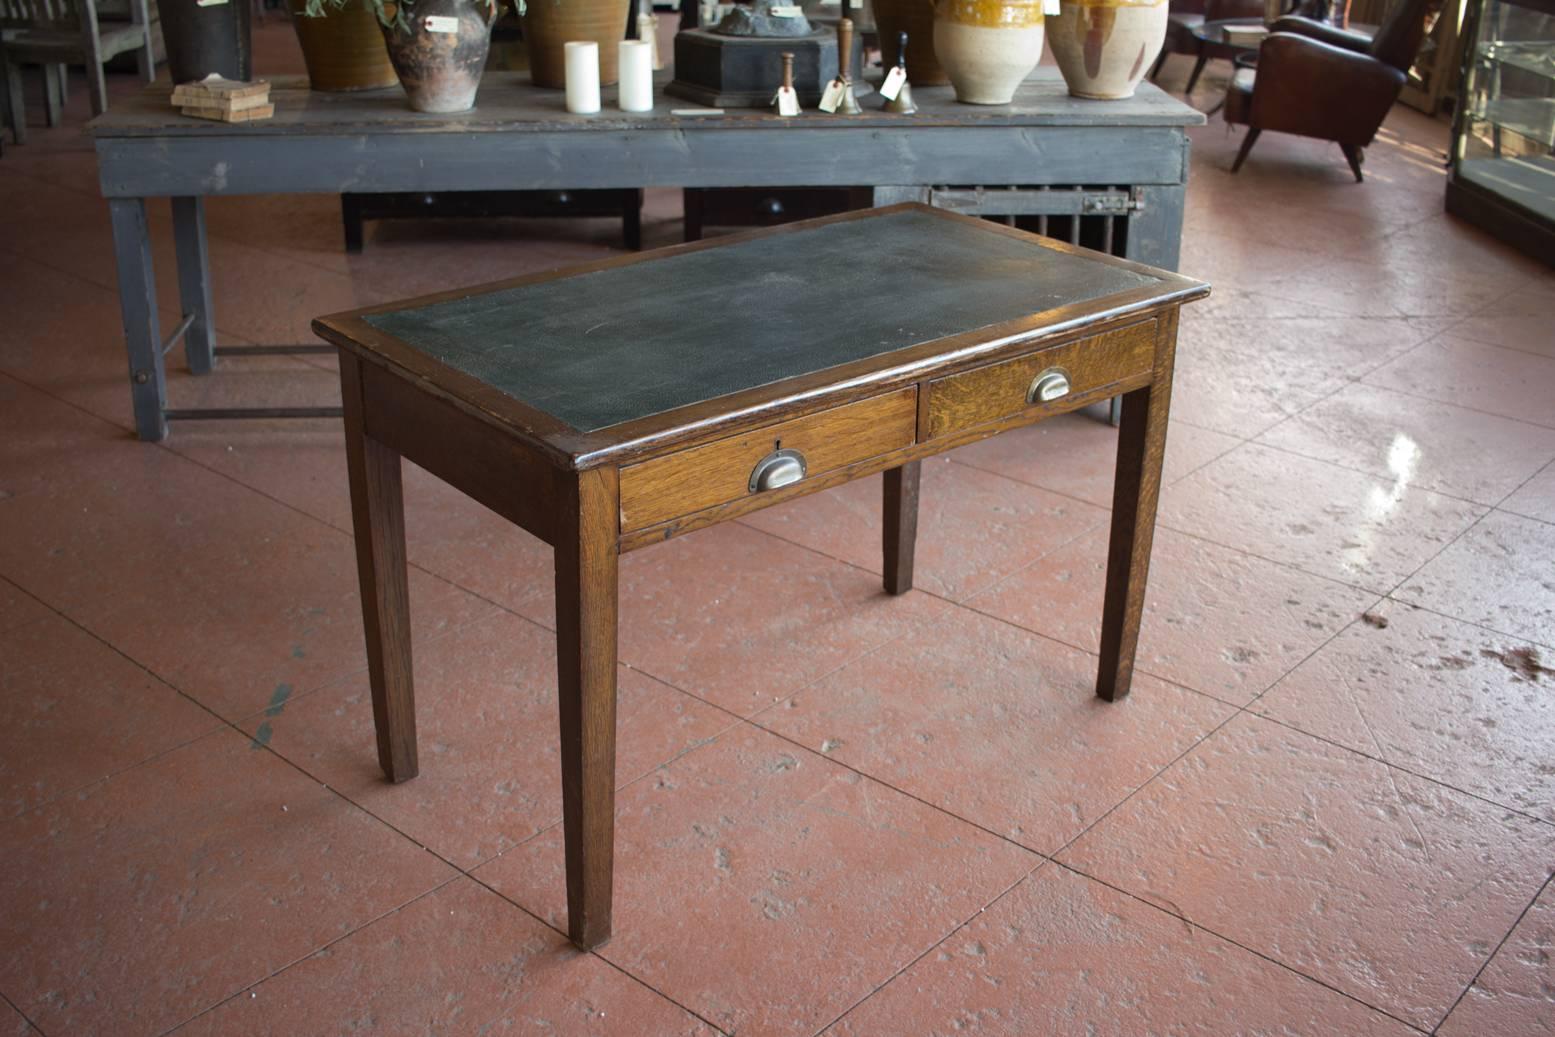 Lovely patina on these English Arts & Crafts writing desks with faux leather top. Nice simple design that will work well well in both traditional and contemporary spaces.